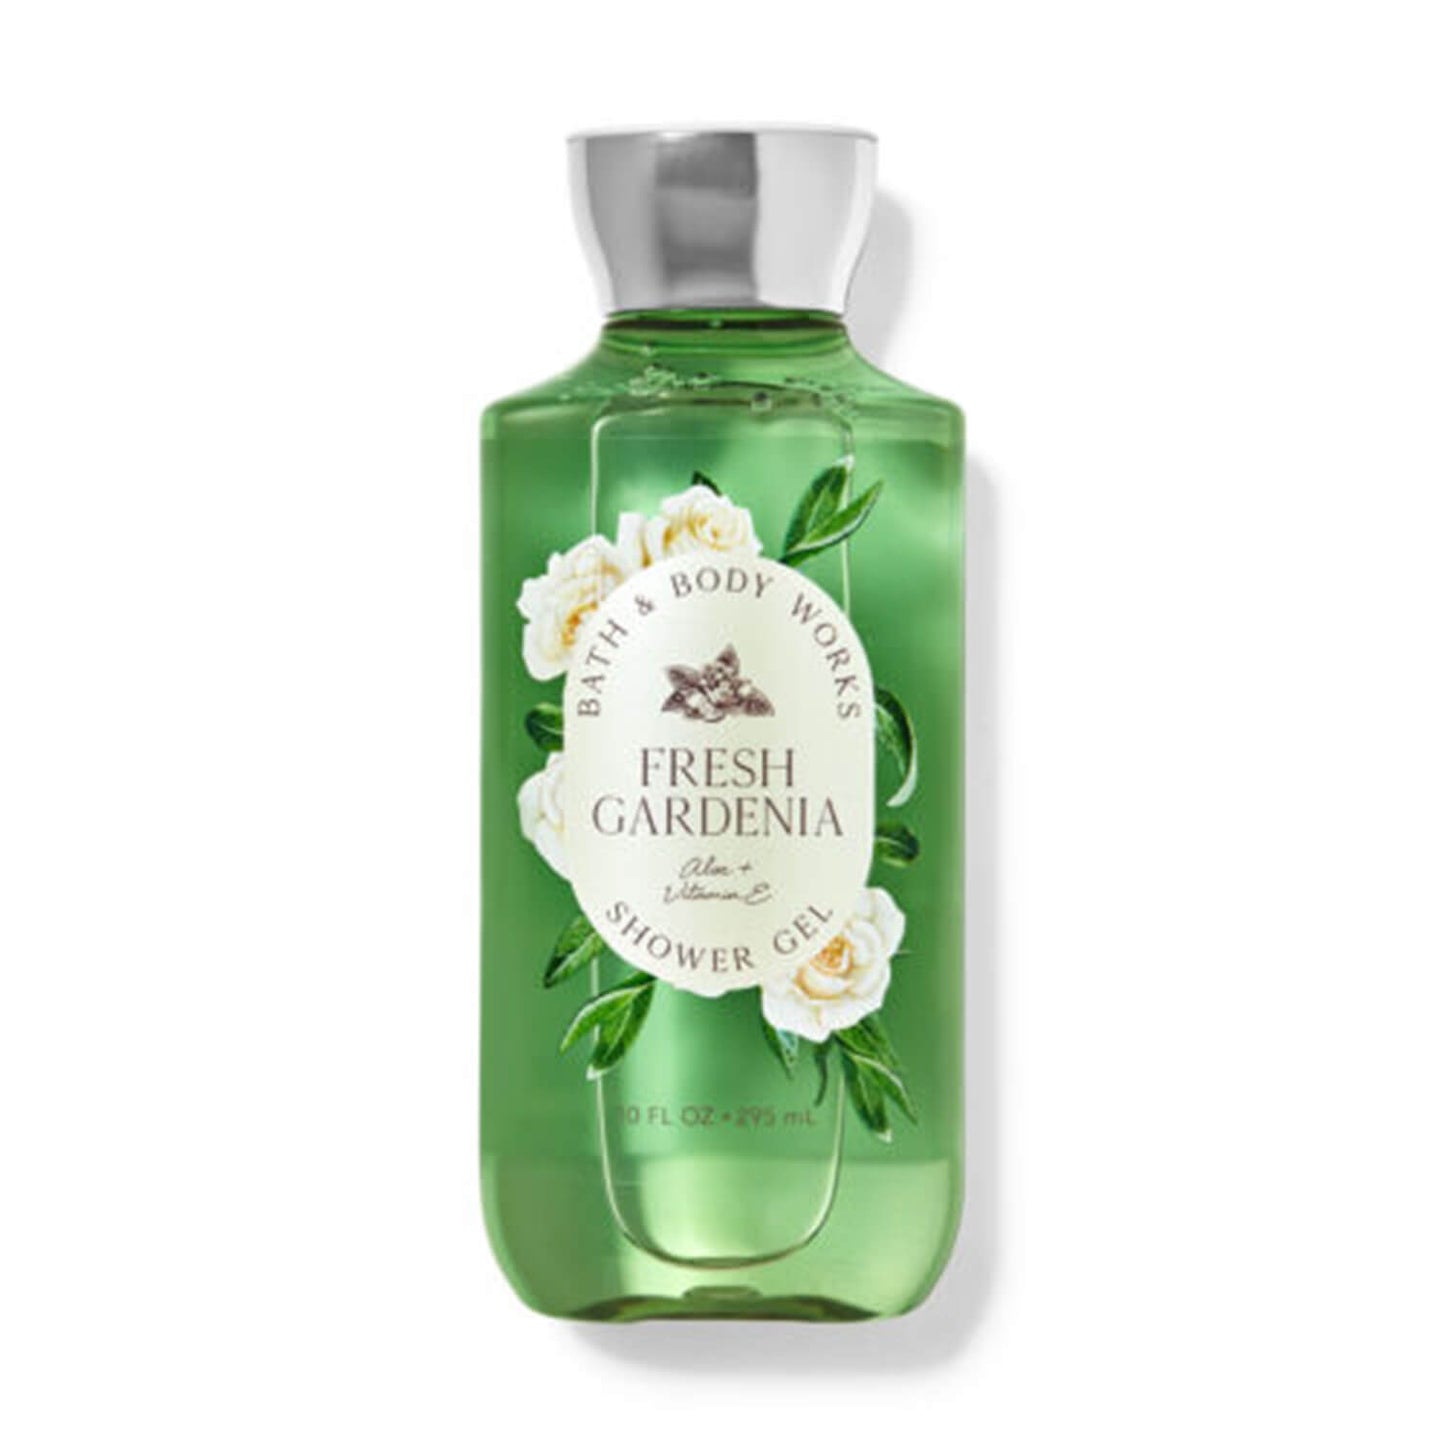 Shop Bath and Body Works shower gel in Fresh Gardenia available at Heygirl.pk for delivery in Pakistan